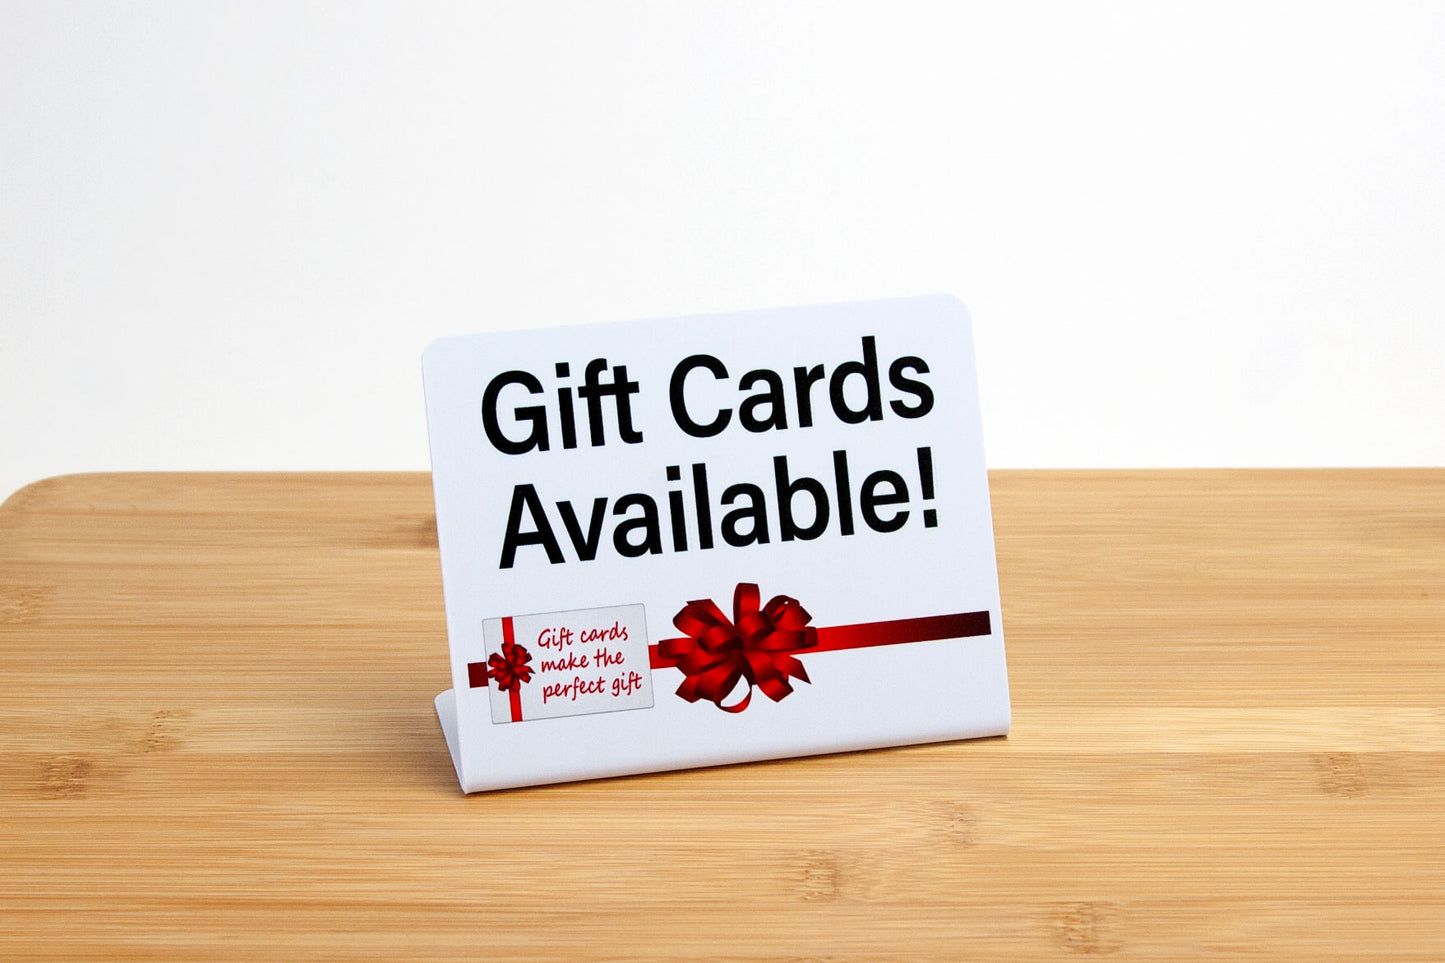 Gift Cards Available Signs - Small